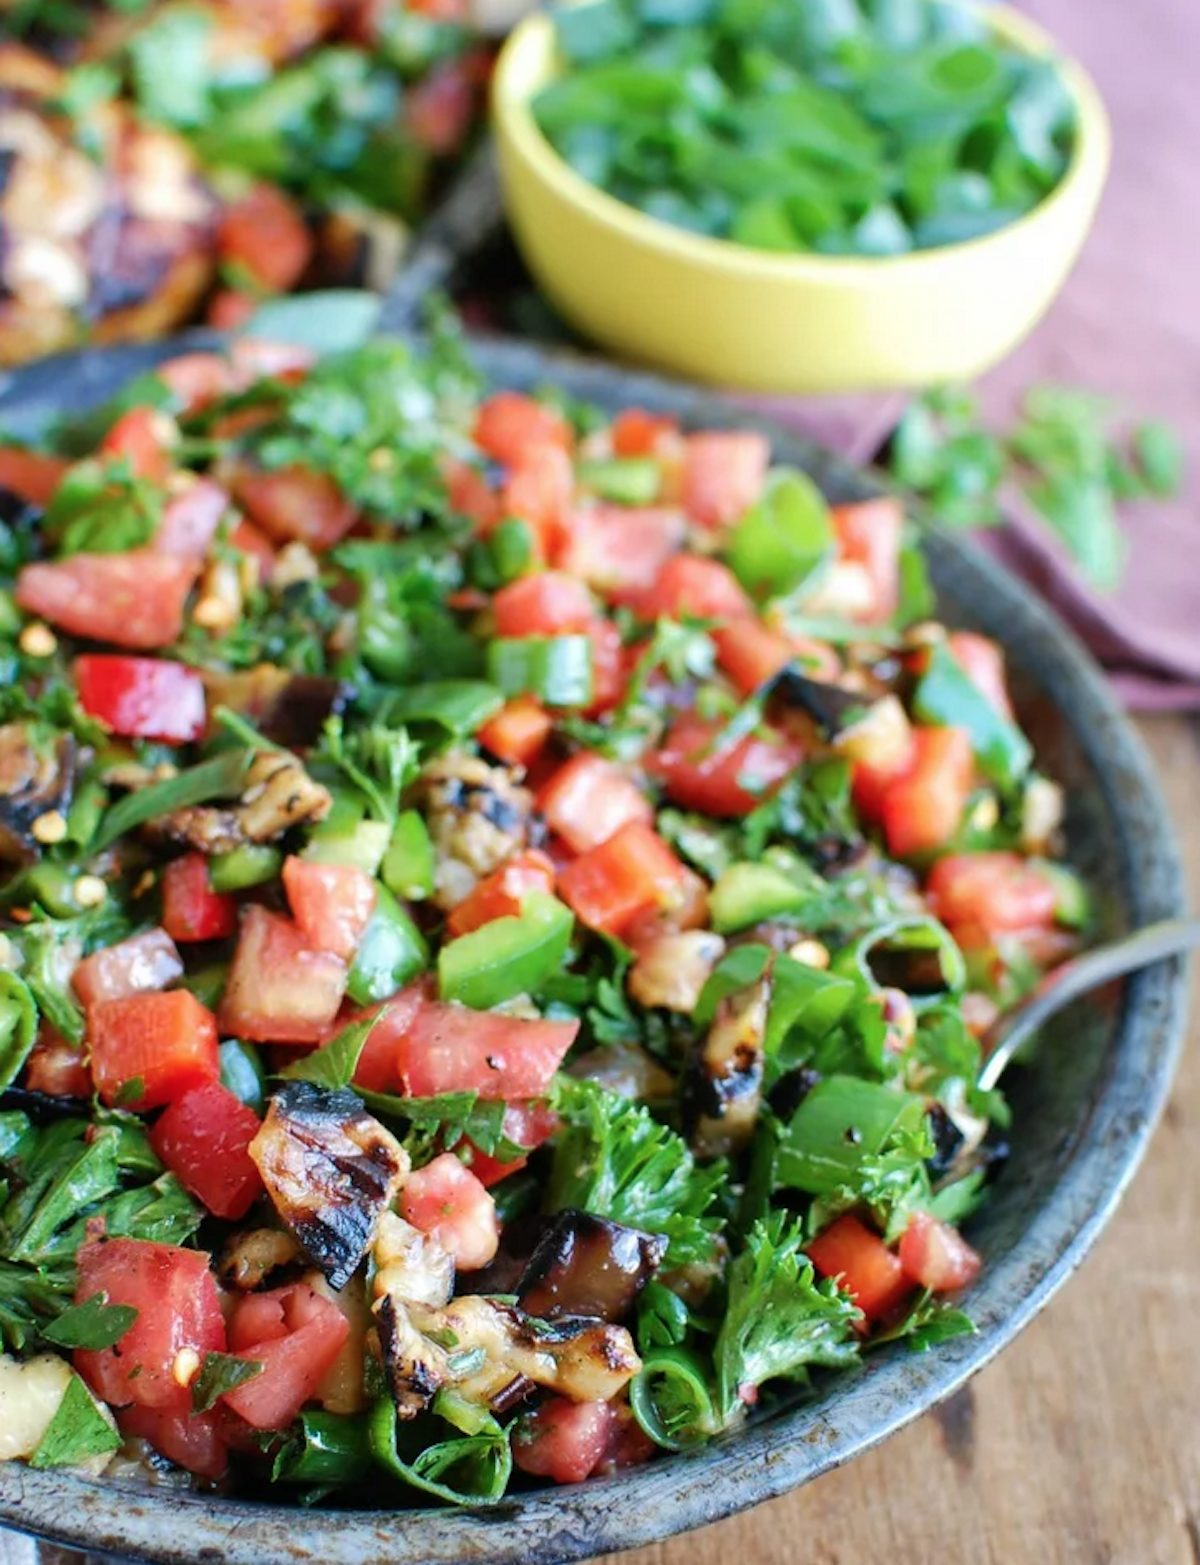 Mediterranean Salad with lots of diced tomatoes on top, in a dark blue bowl with silver spoon.